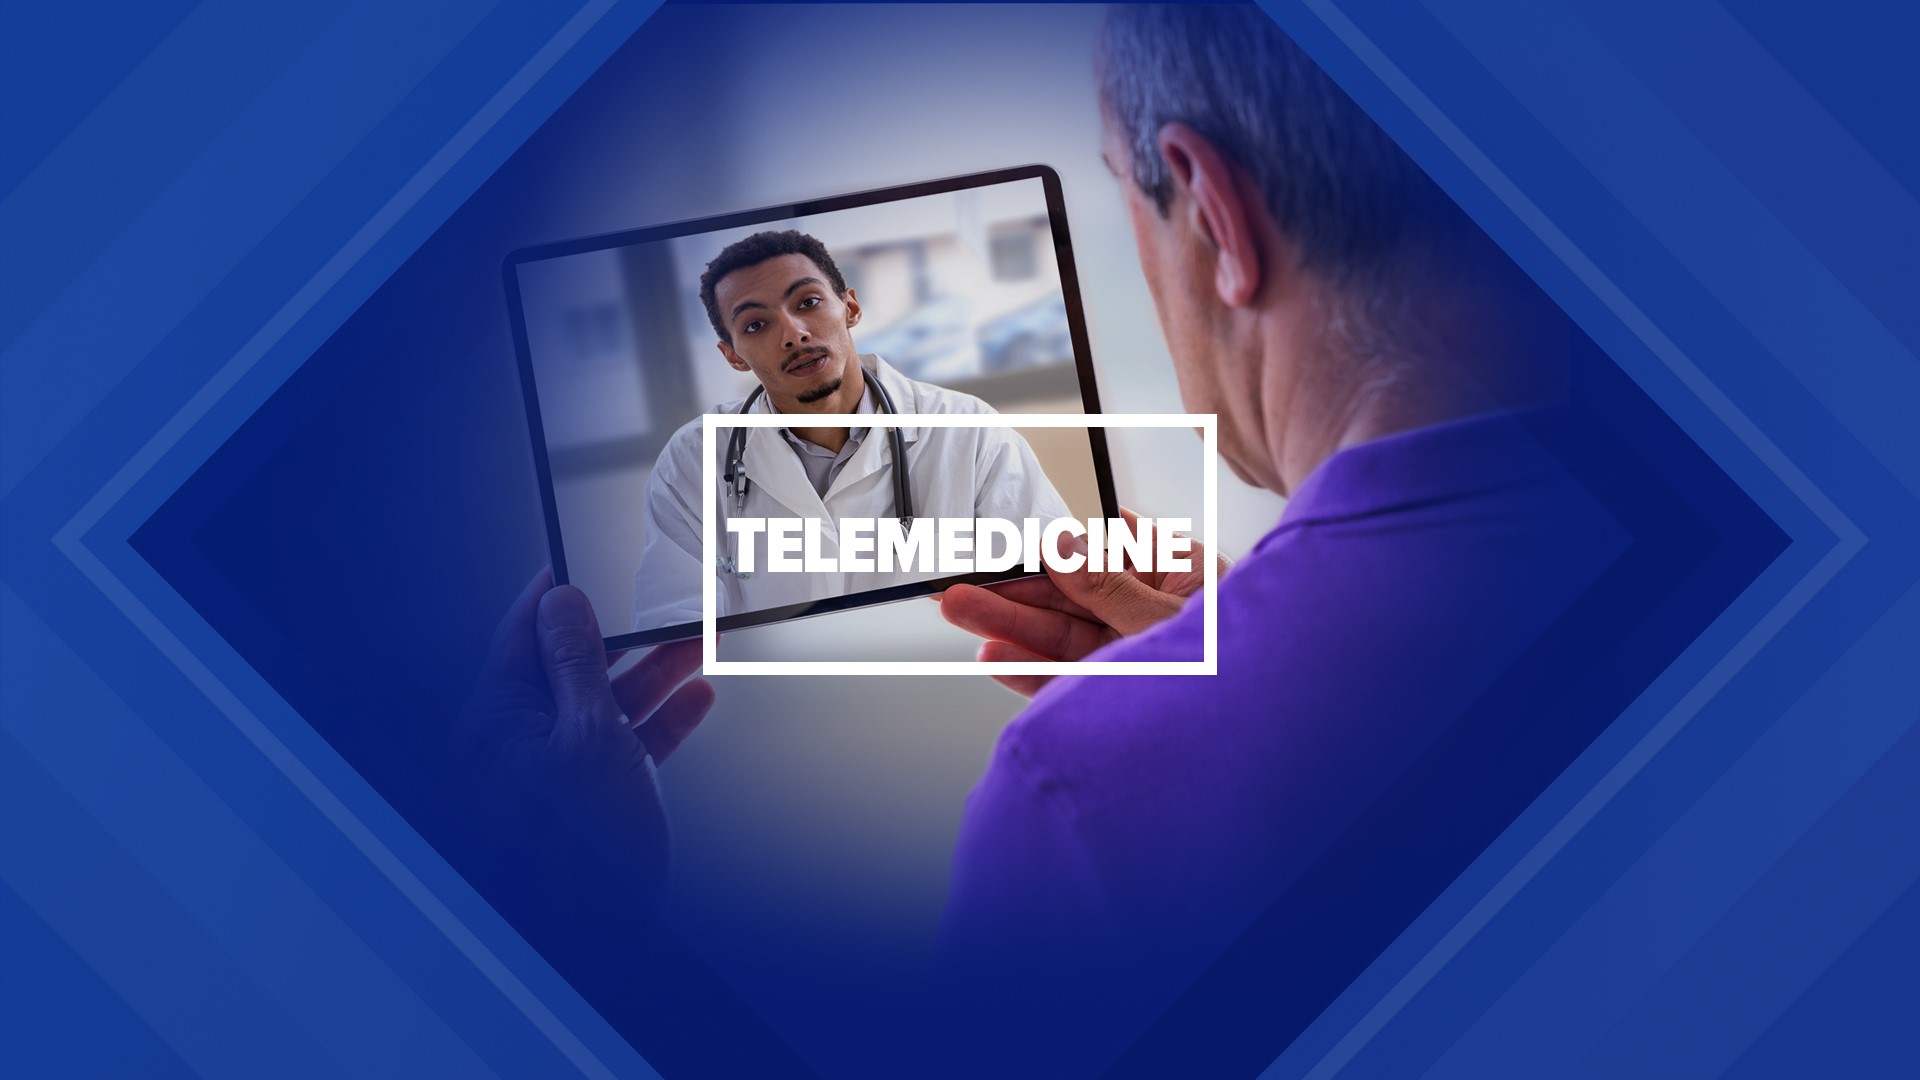 Last year, doctors were rushing to ramp up their telemedicine capabilities. Now, virtual visits are likely to remain a permanent part of the health care industry.